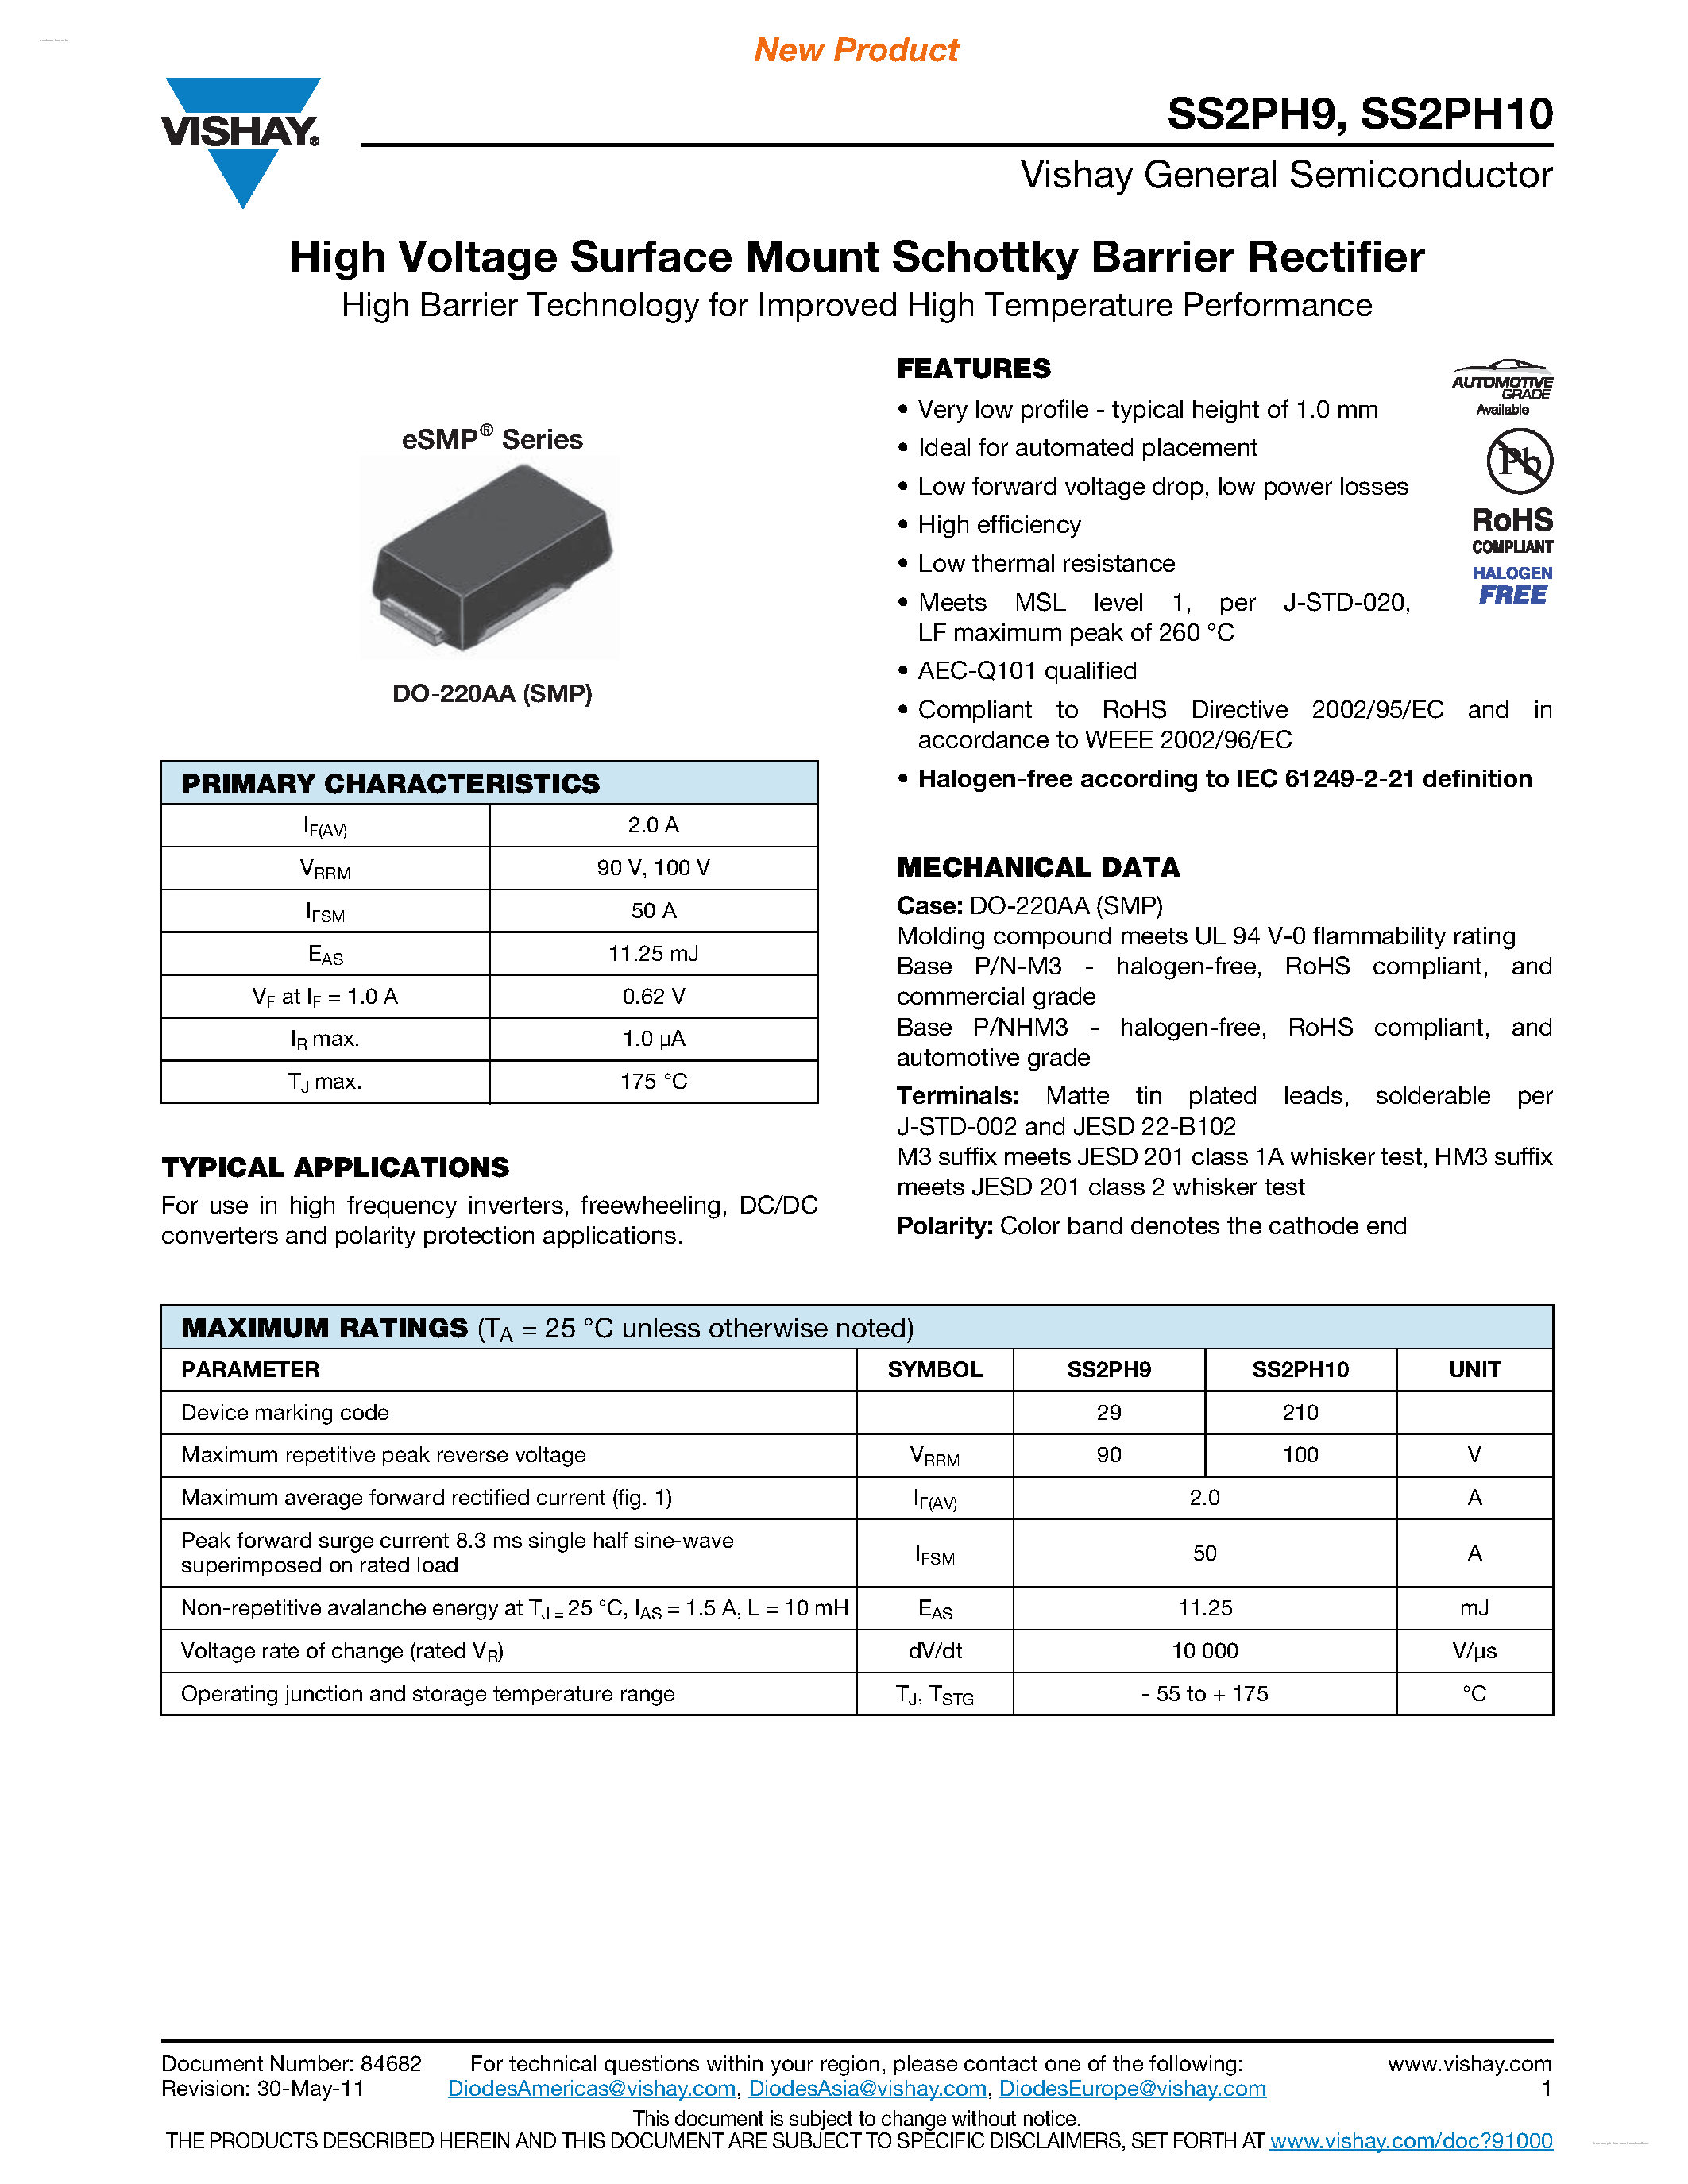 Datasheet SS2PH10 - (SS2PH9 / SS2PH10) High Voltage Surface Mount Schottky Barrier Rectifier page 1